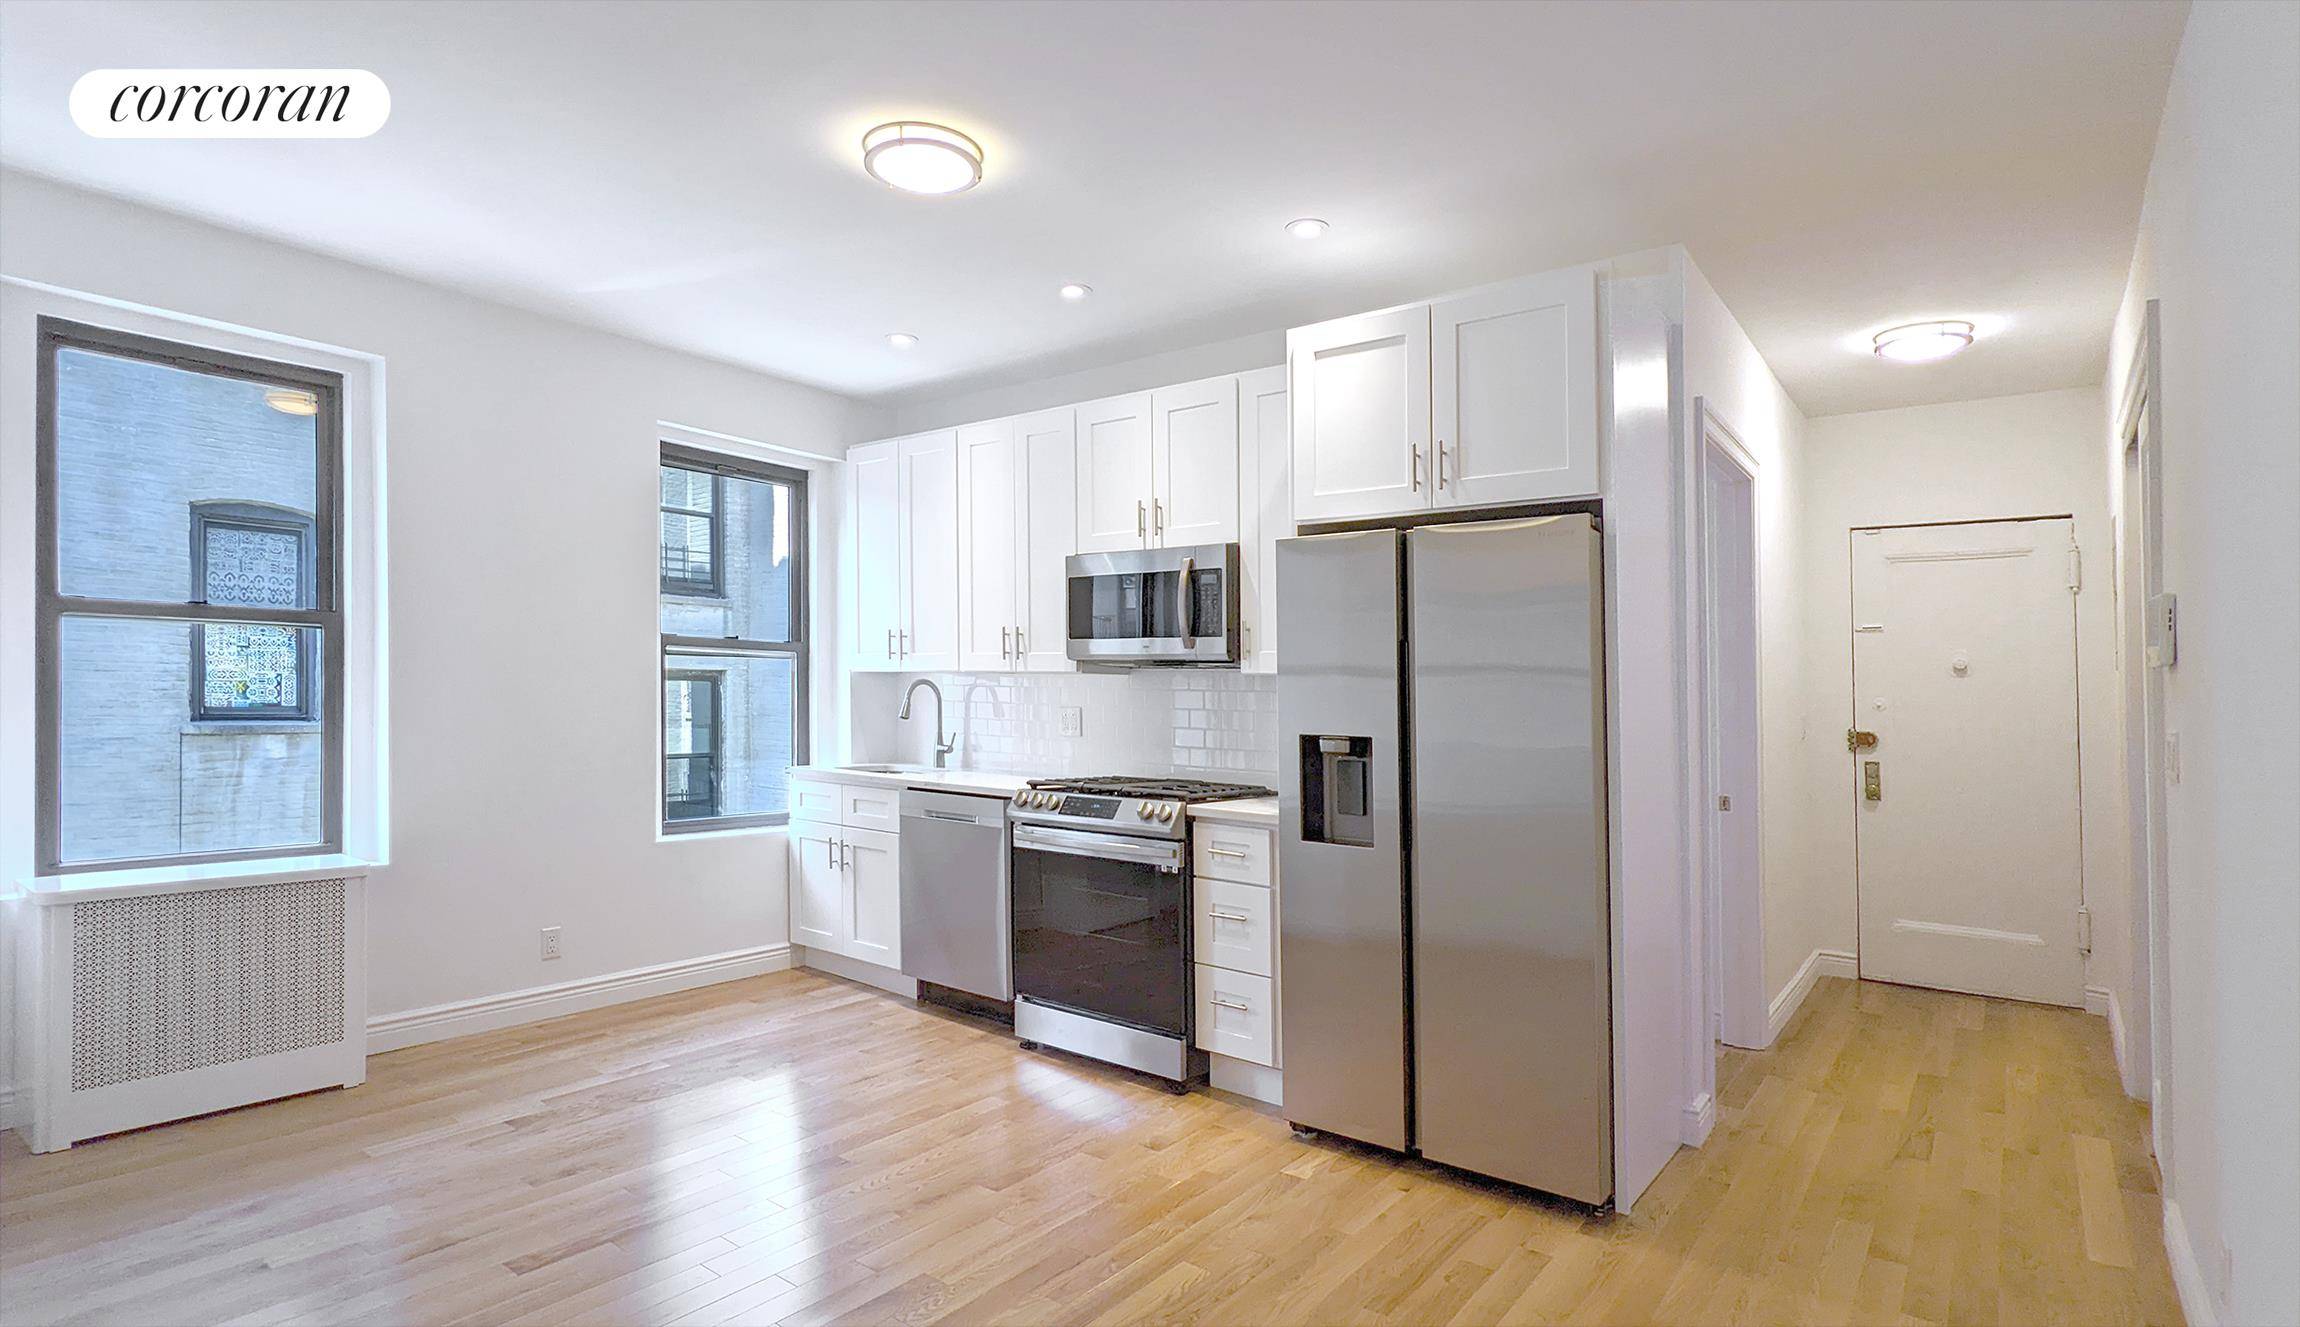 Presenting Astoria Lights four completely renovated pre war co op buildings that have been reimagined and reinvigorated with open, loft style floor plans, cutting edge amenities and sophisticated modern style ...